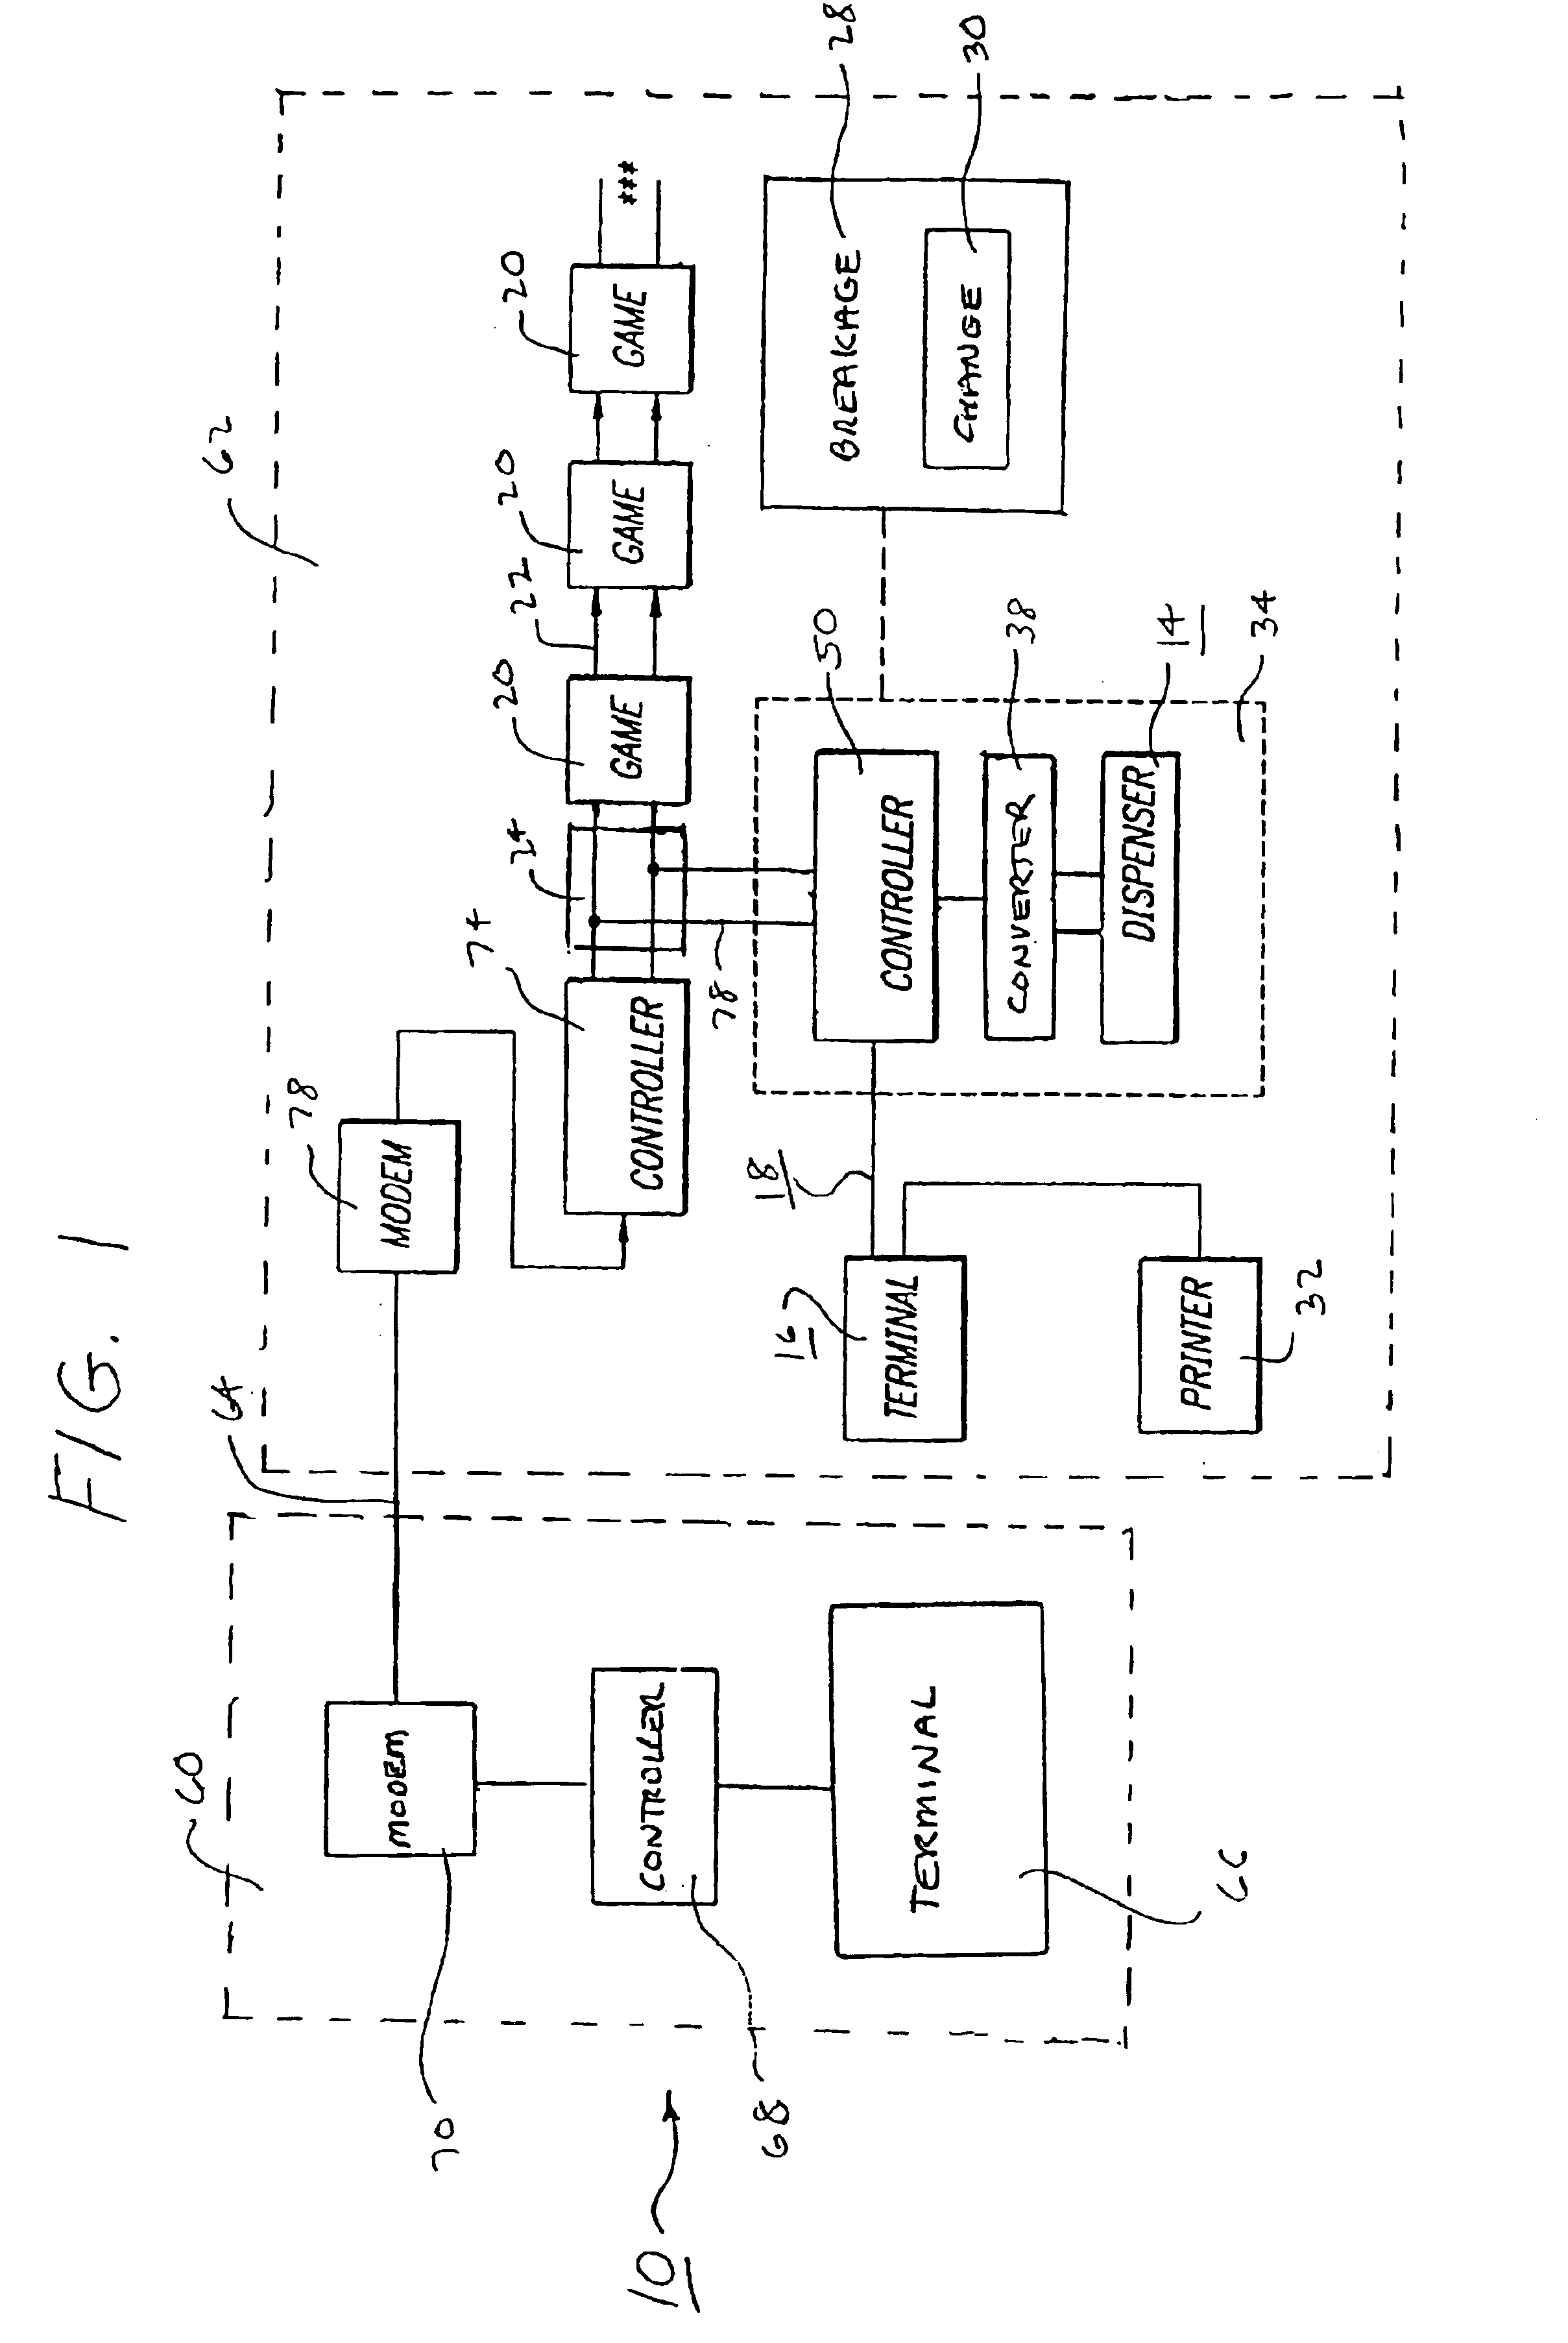 System and method for securely storing and controlling the dispensing of a payout